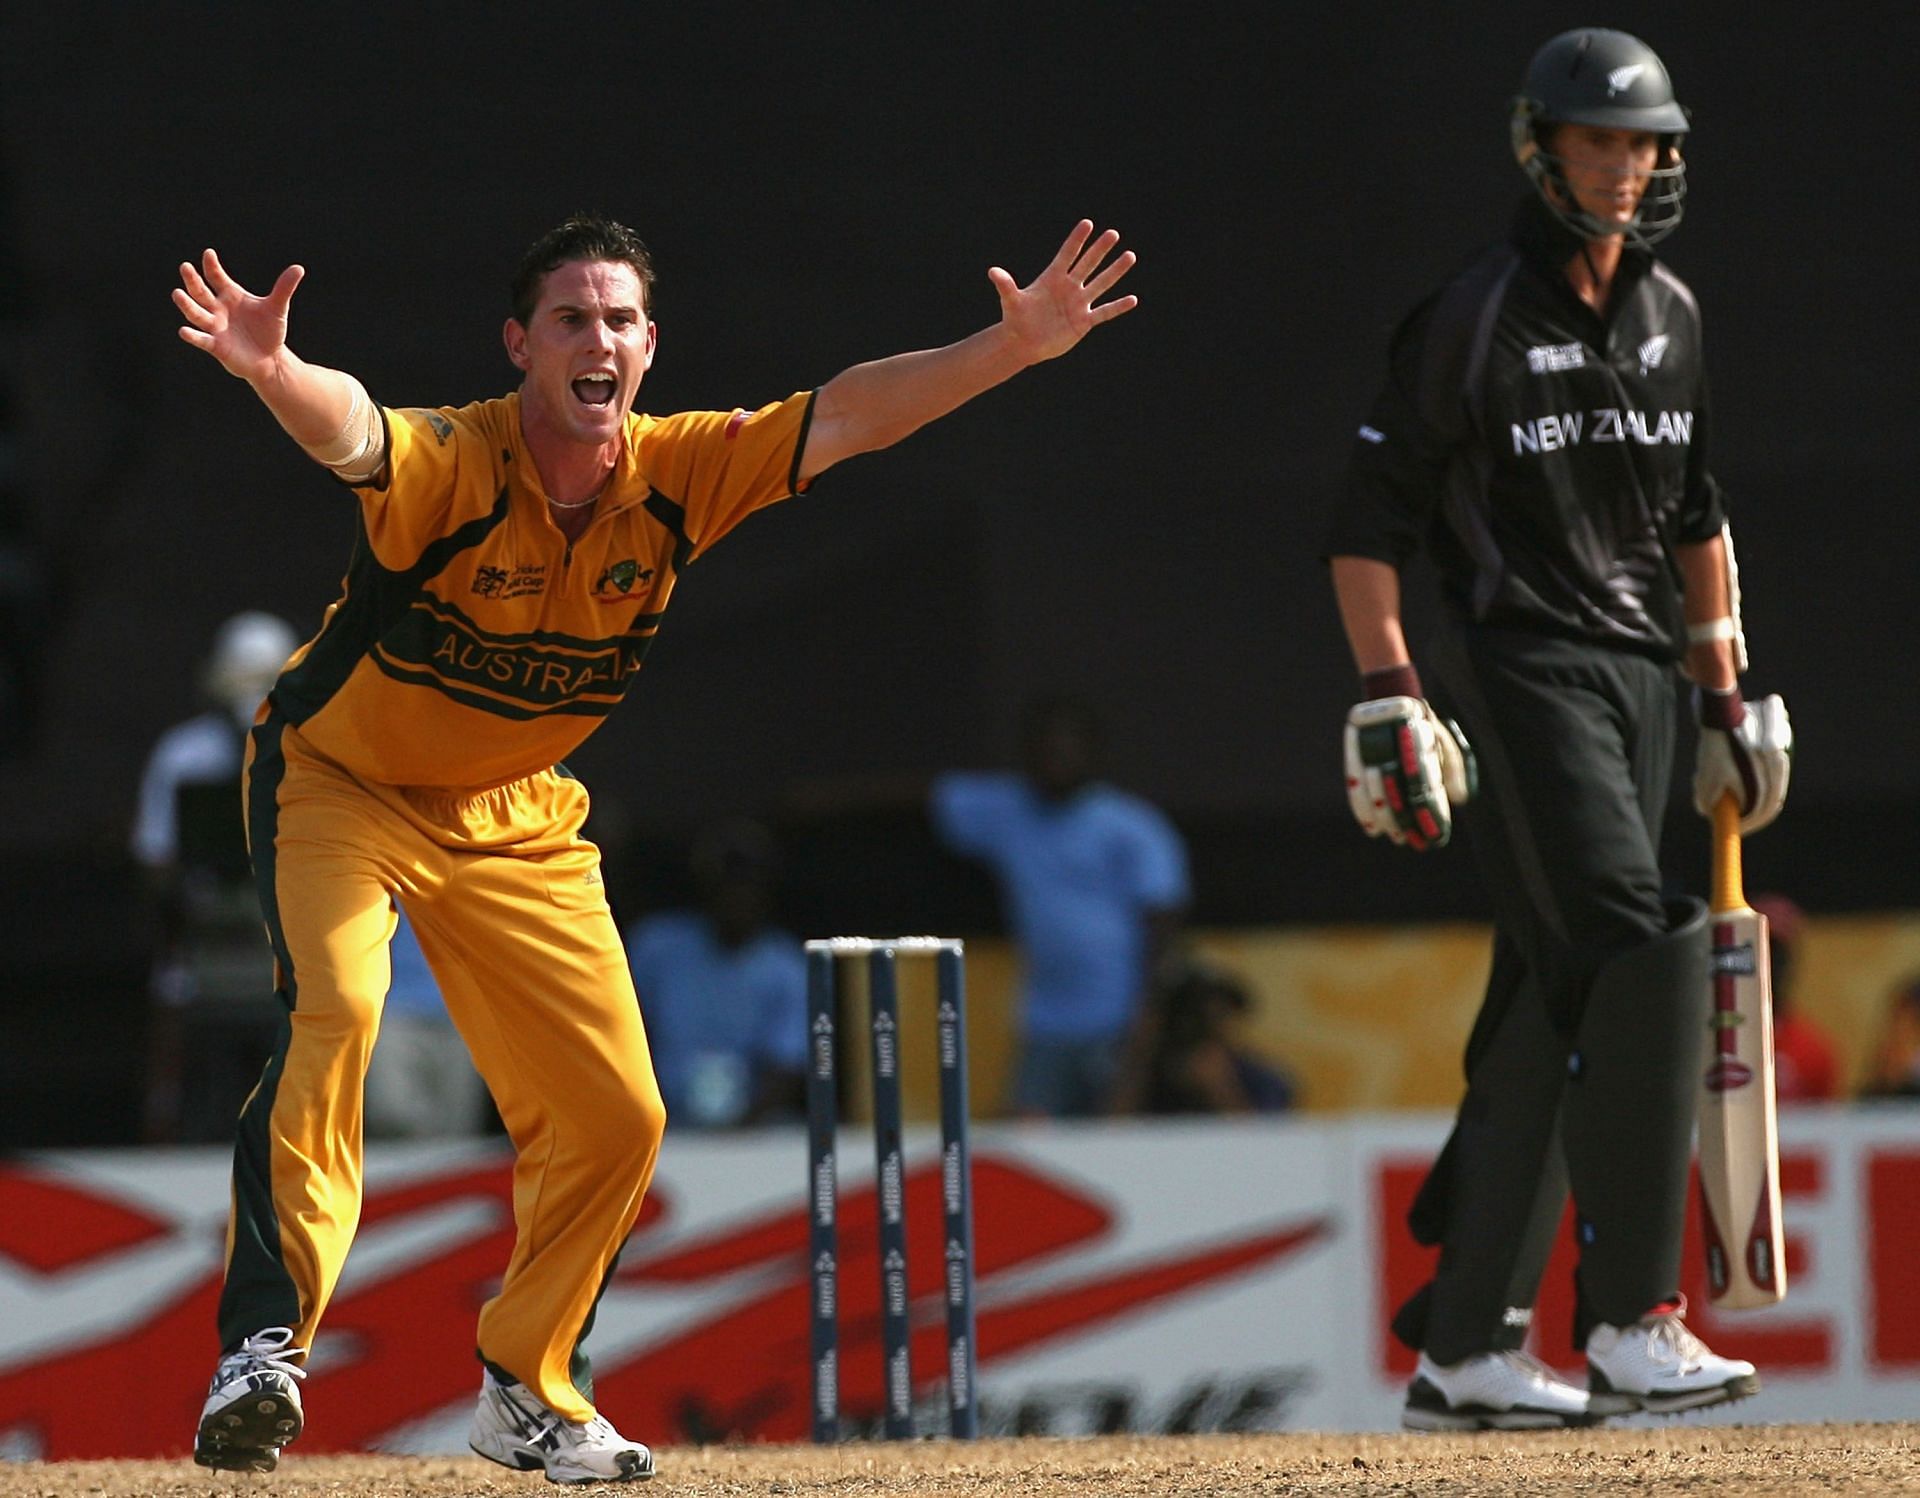 Shaun Tait was a menace for batters to contend with at the 2007 World Cup.